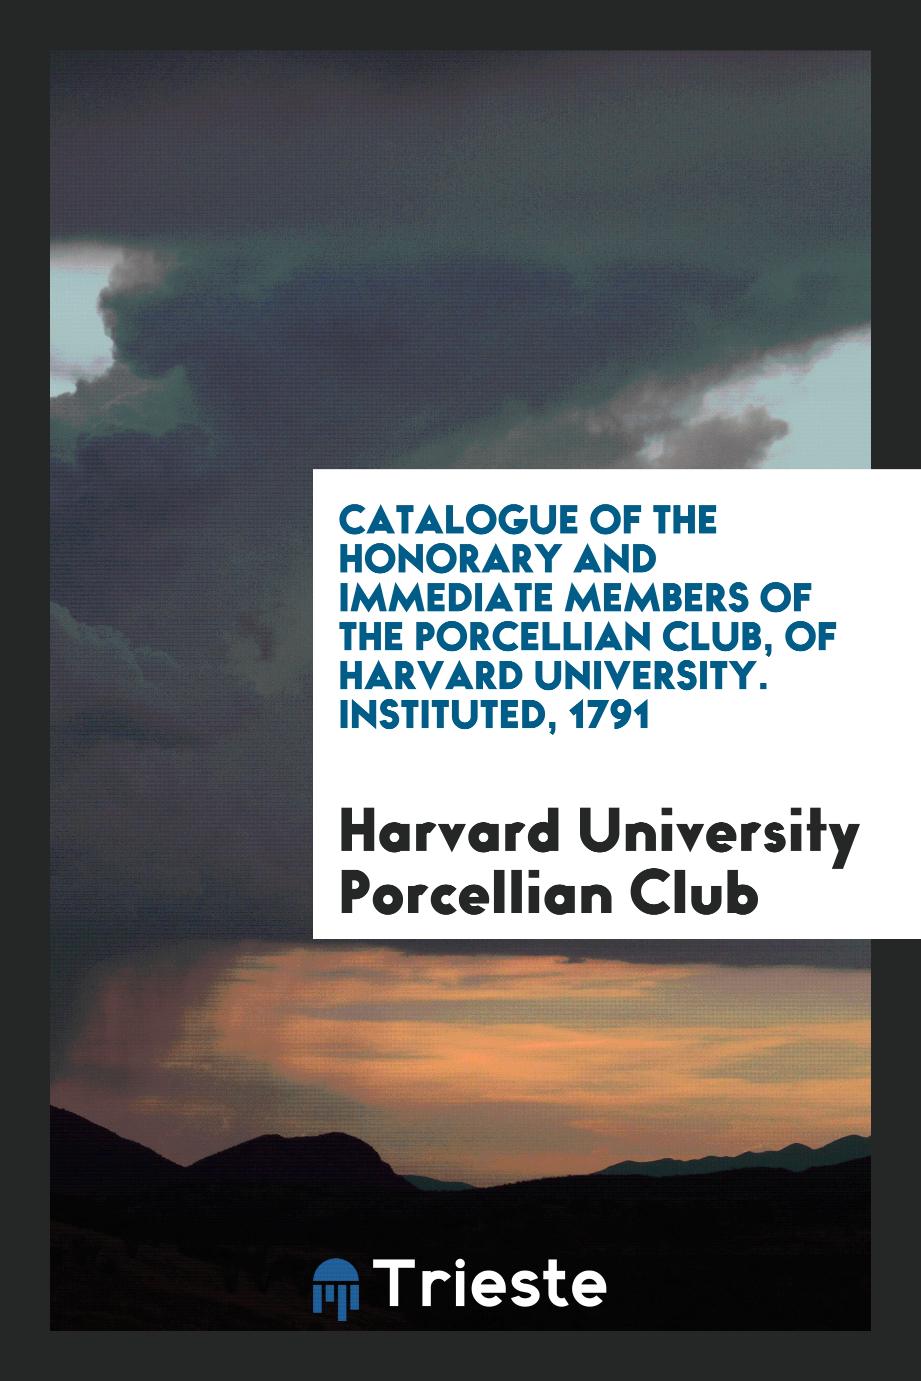 Catalogue of the Honorary and immediate members of the porcellian club, of harvard university. Instituted, 1791